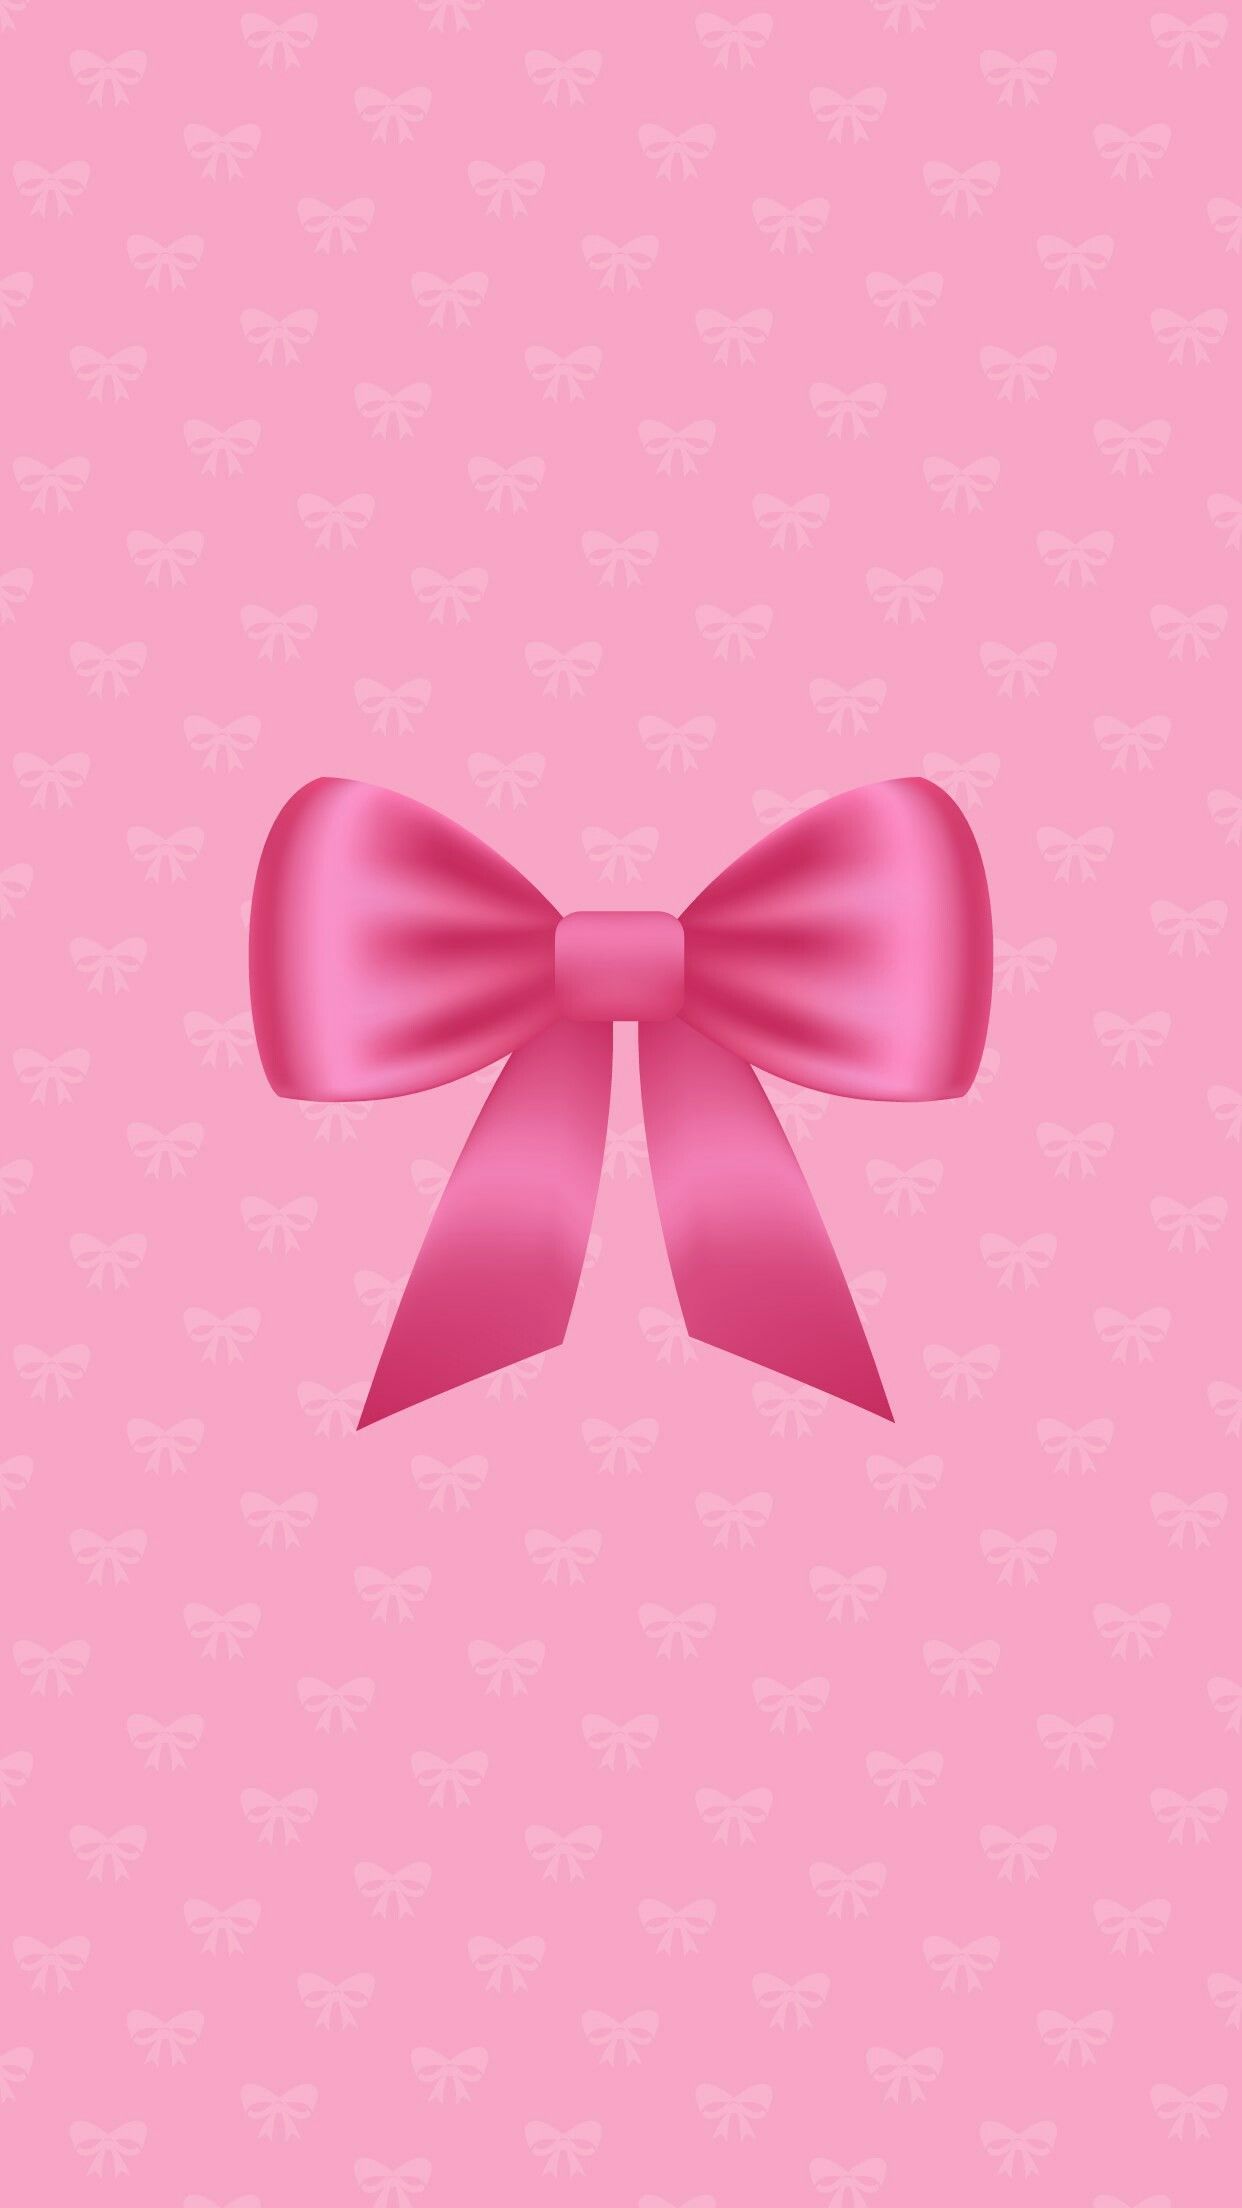 Simple Pink Bow Wallpaper Background Wallpaper Image For Free Download   Pngtree